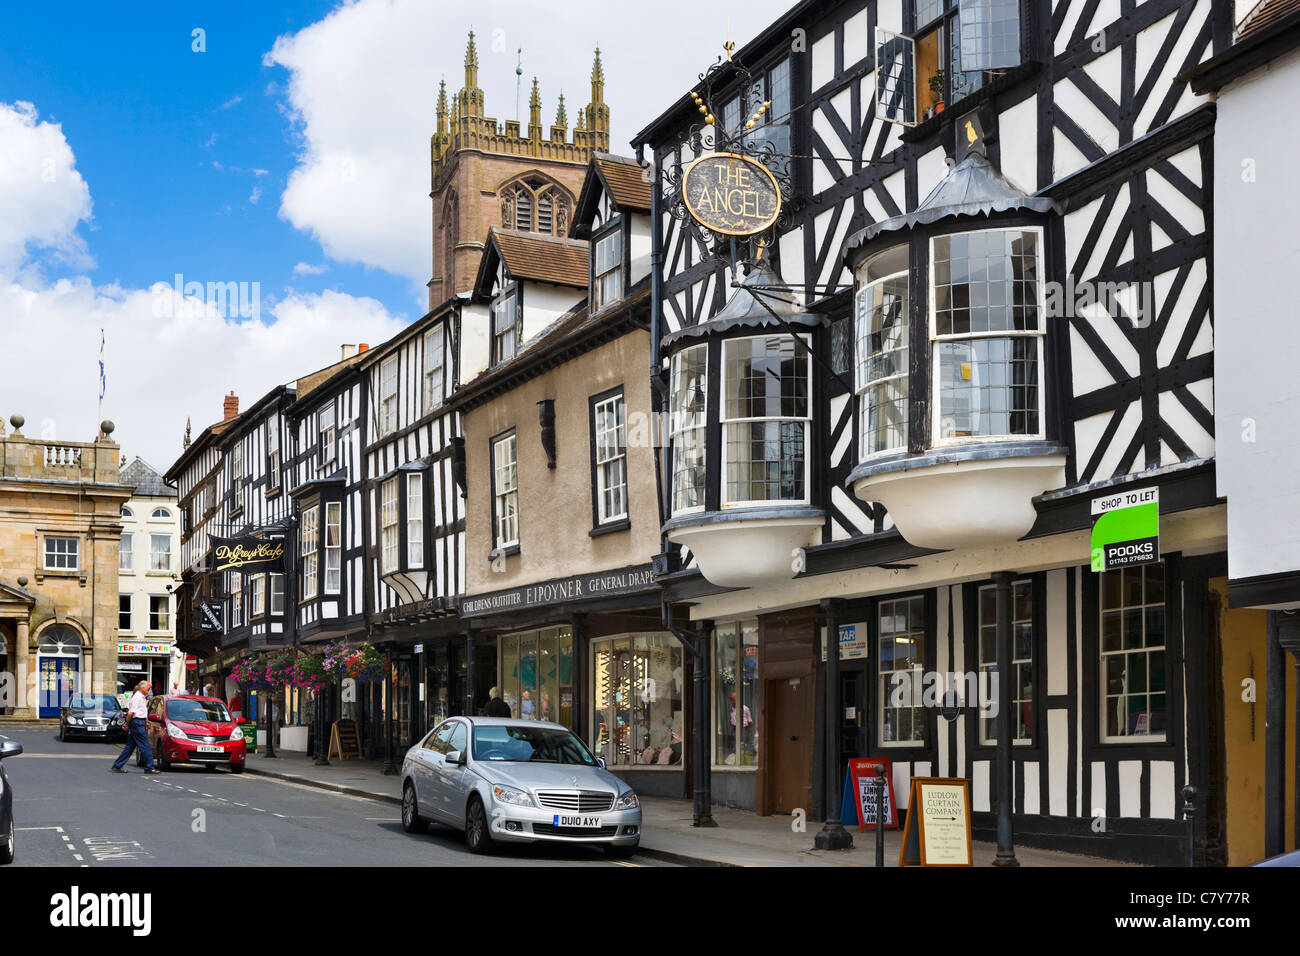 Shops on Broad Street in the centre of the old town, Ludlow, Shropshire, England, UK Stock Photo